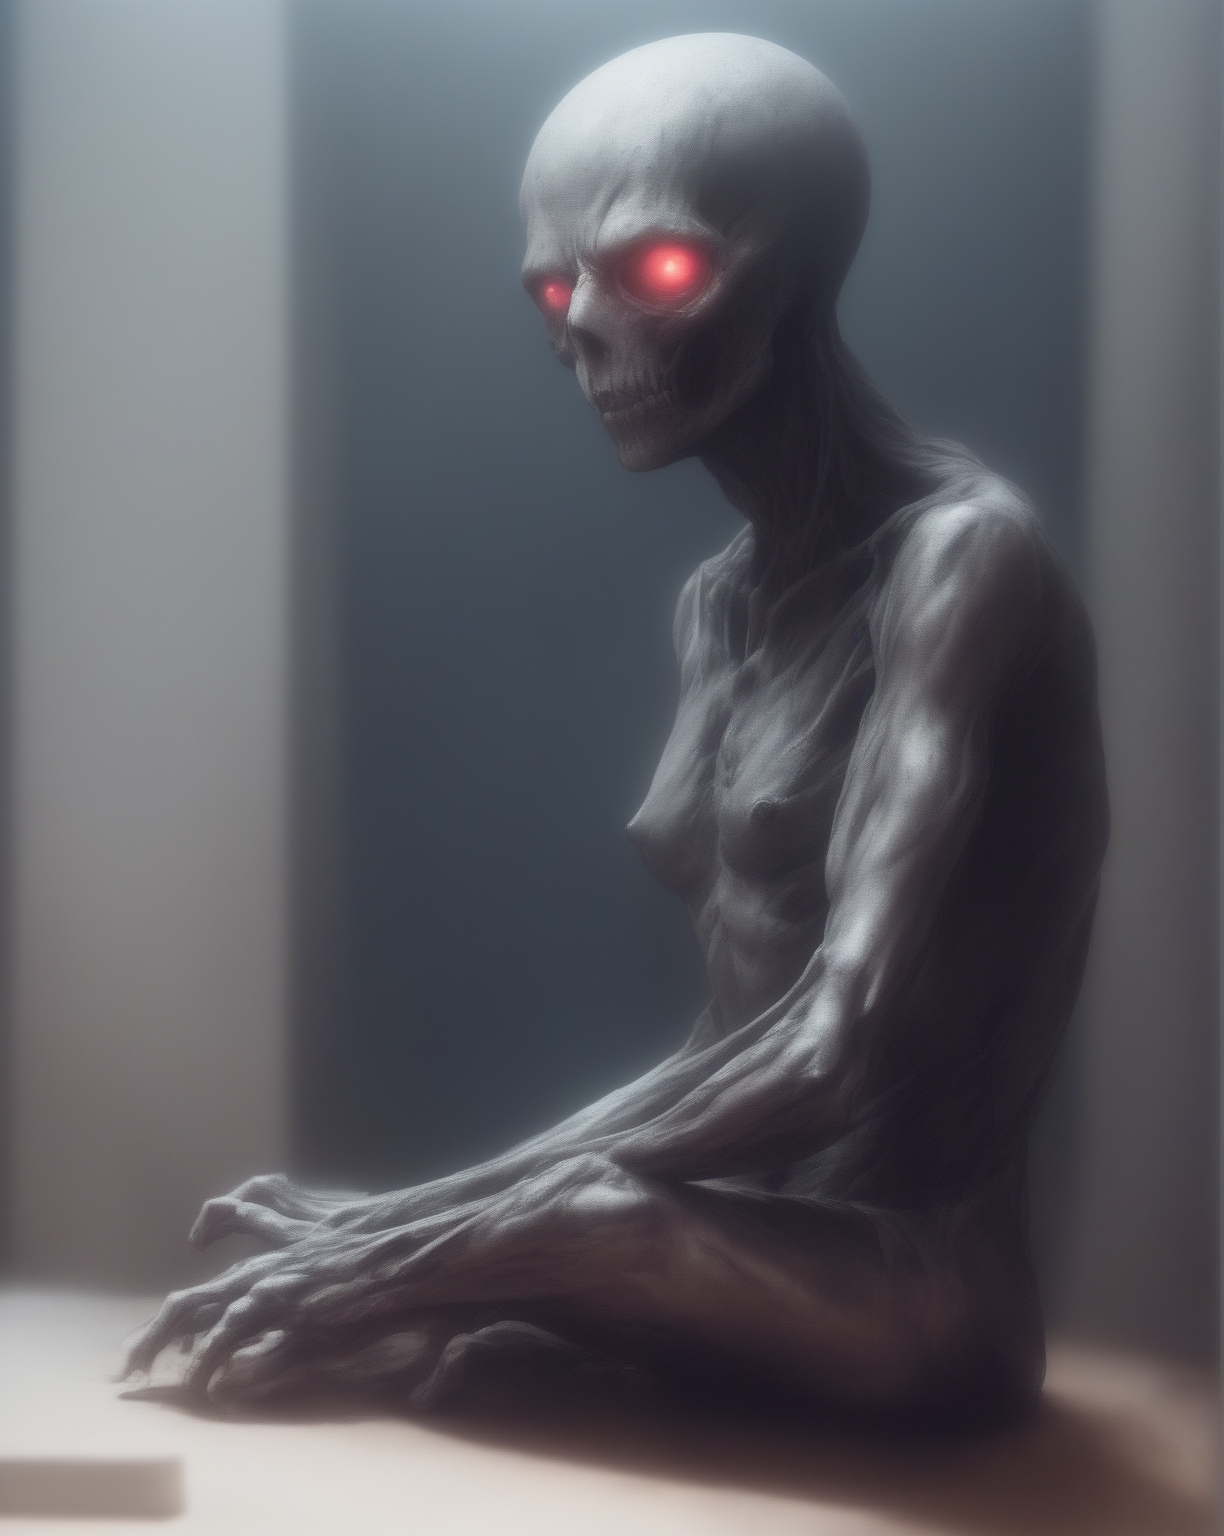 SCP-096 [1.2]